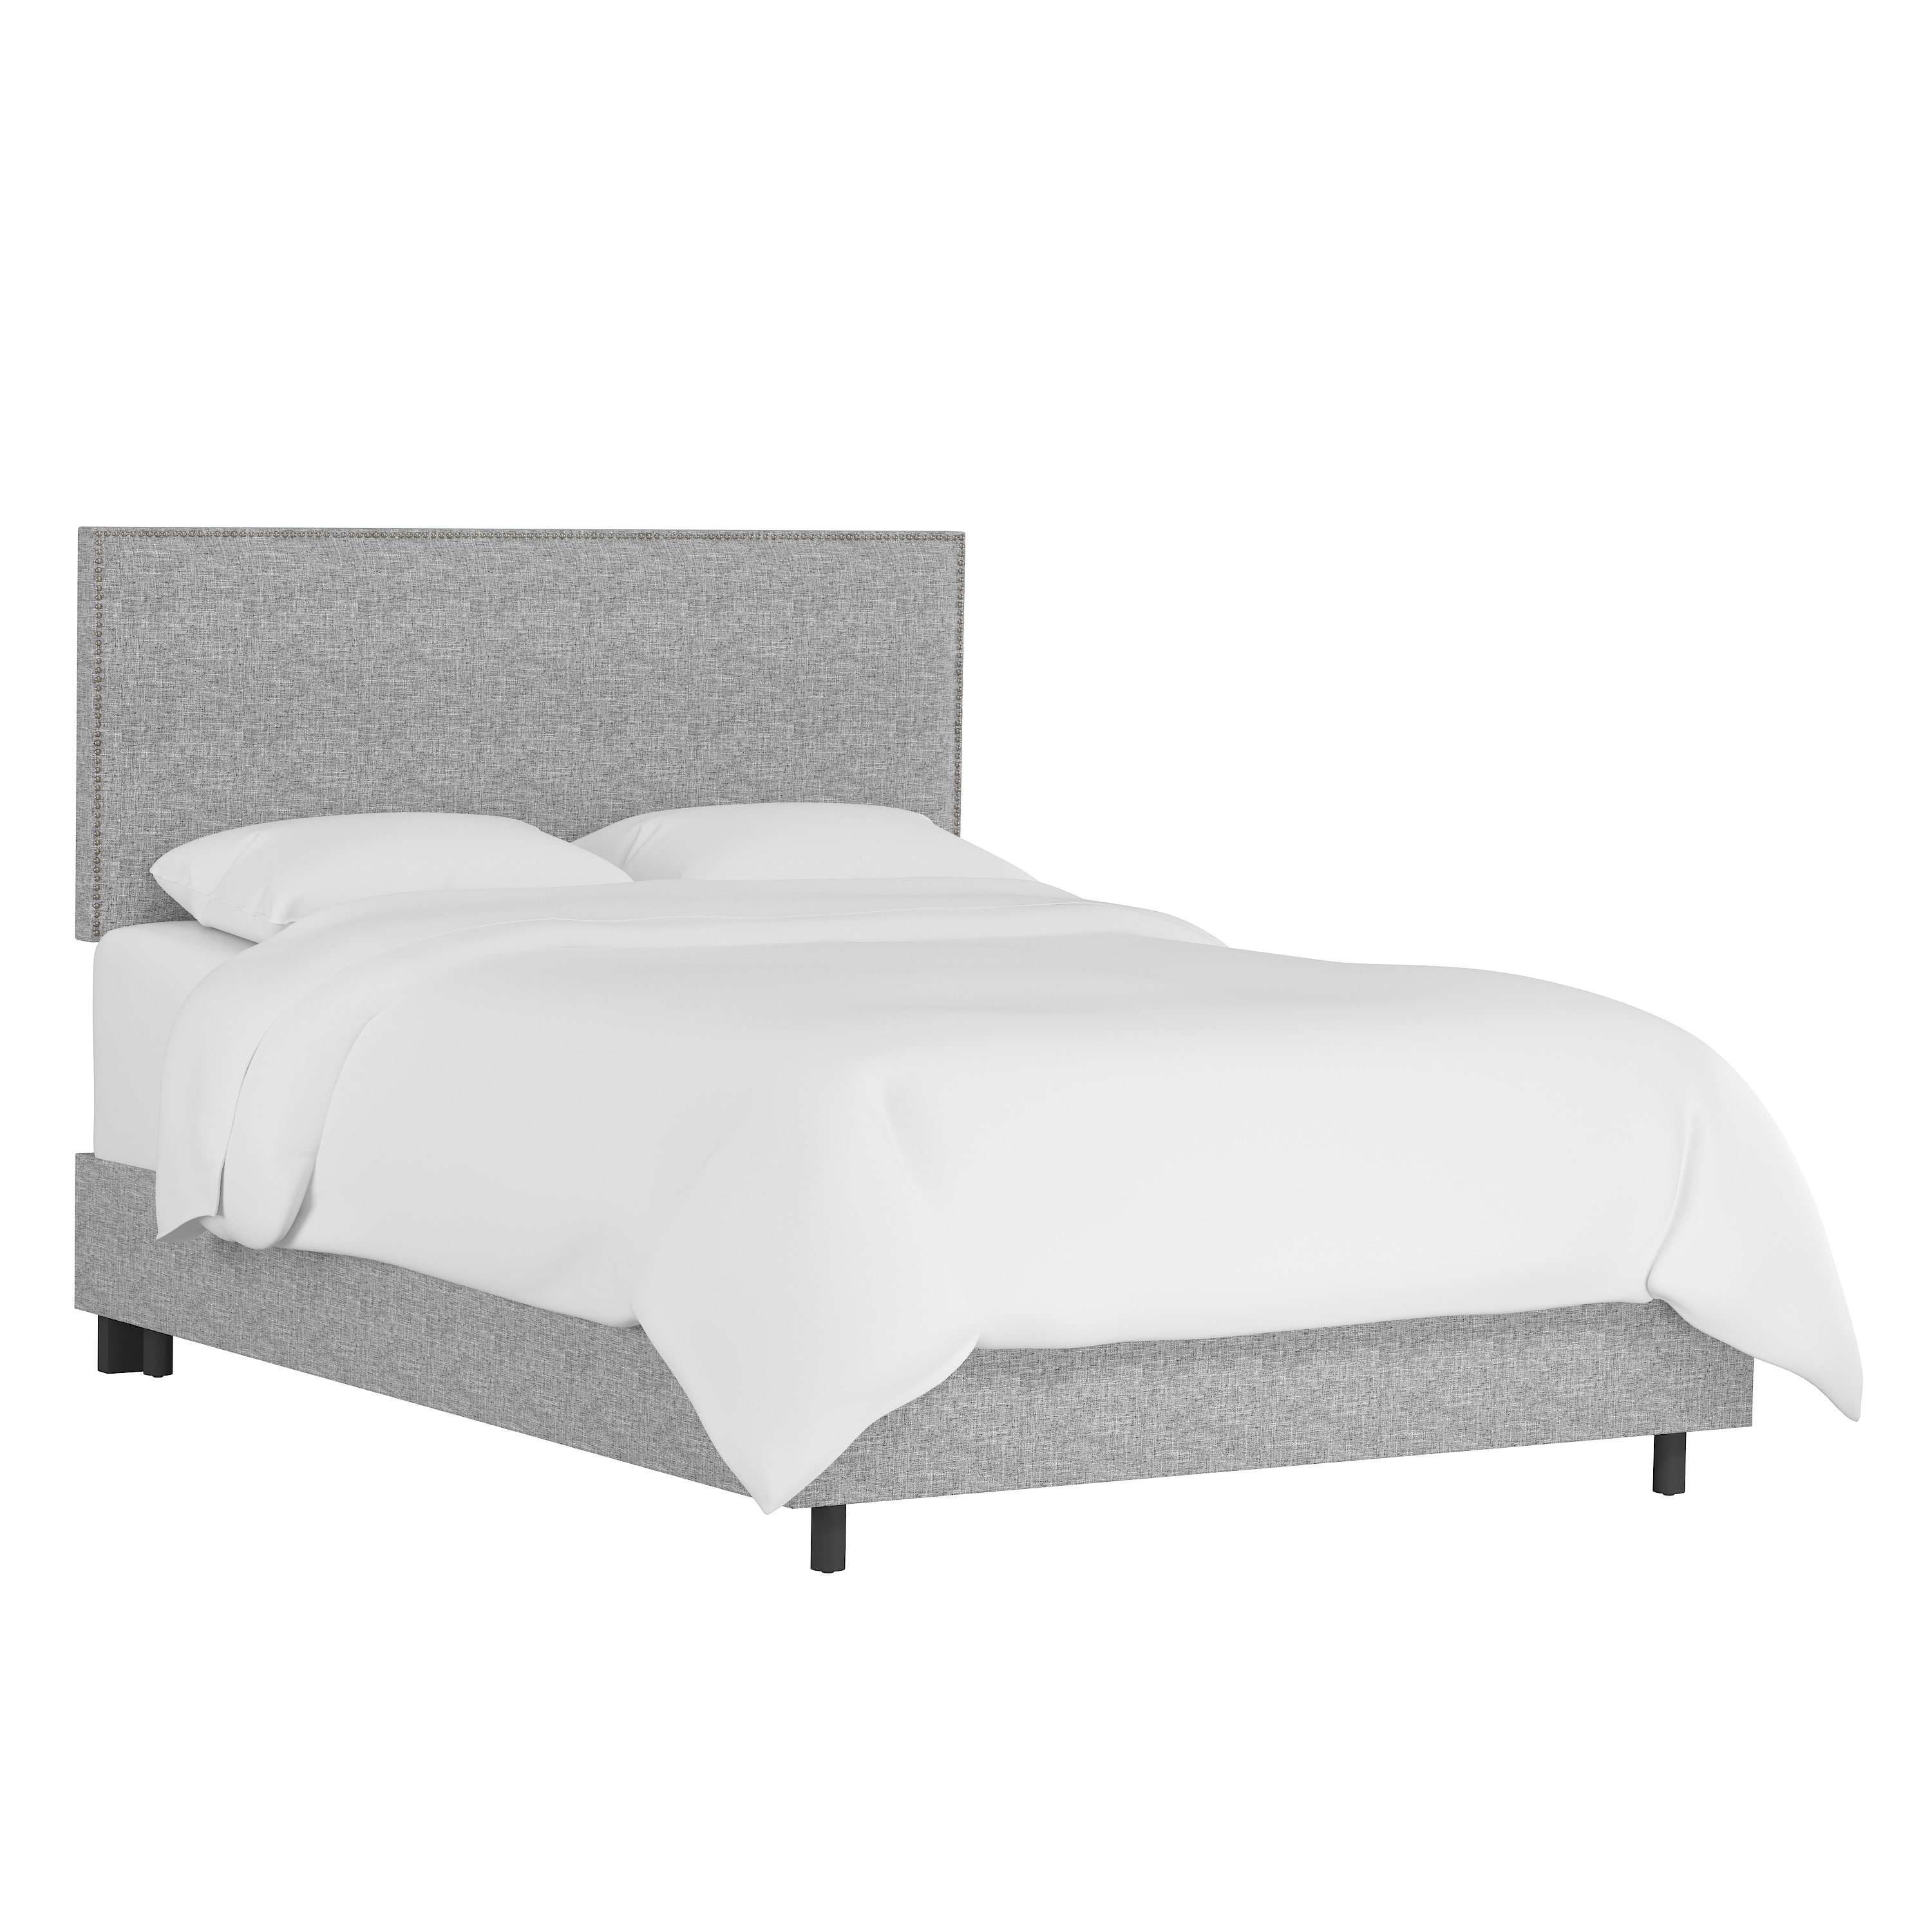 Queen Randolph Bed, Pewter Nailheads - Image 0